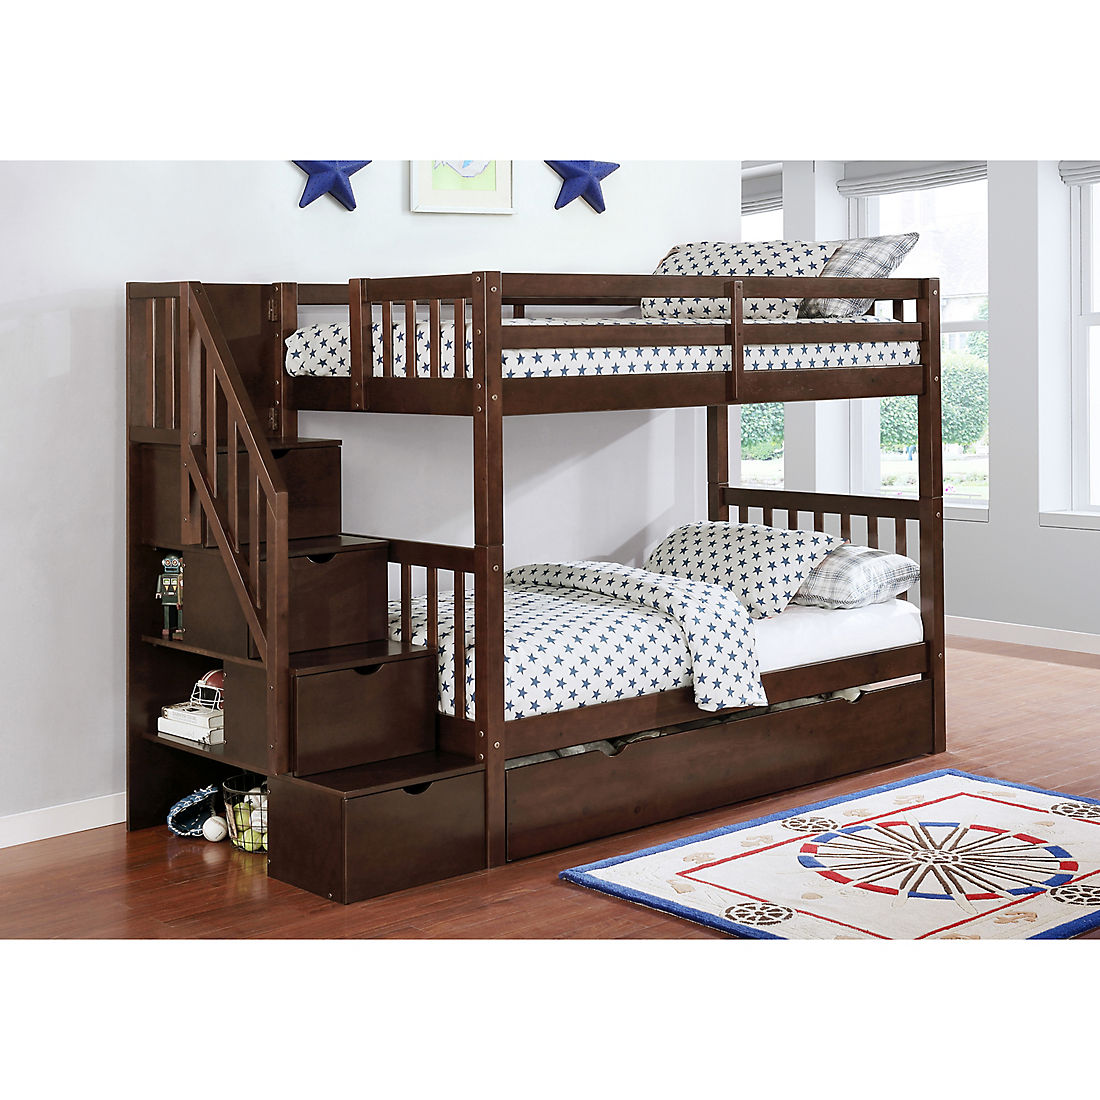 Berkley Jensen Twin Over Stairway, Bunk Beds With Trundle And Mattresses